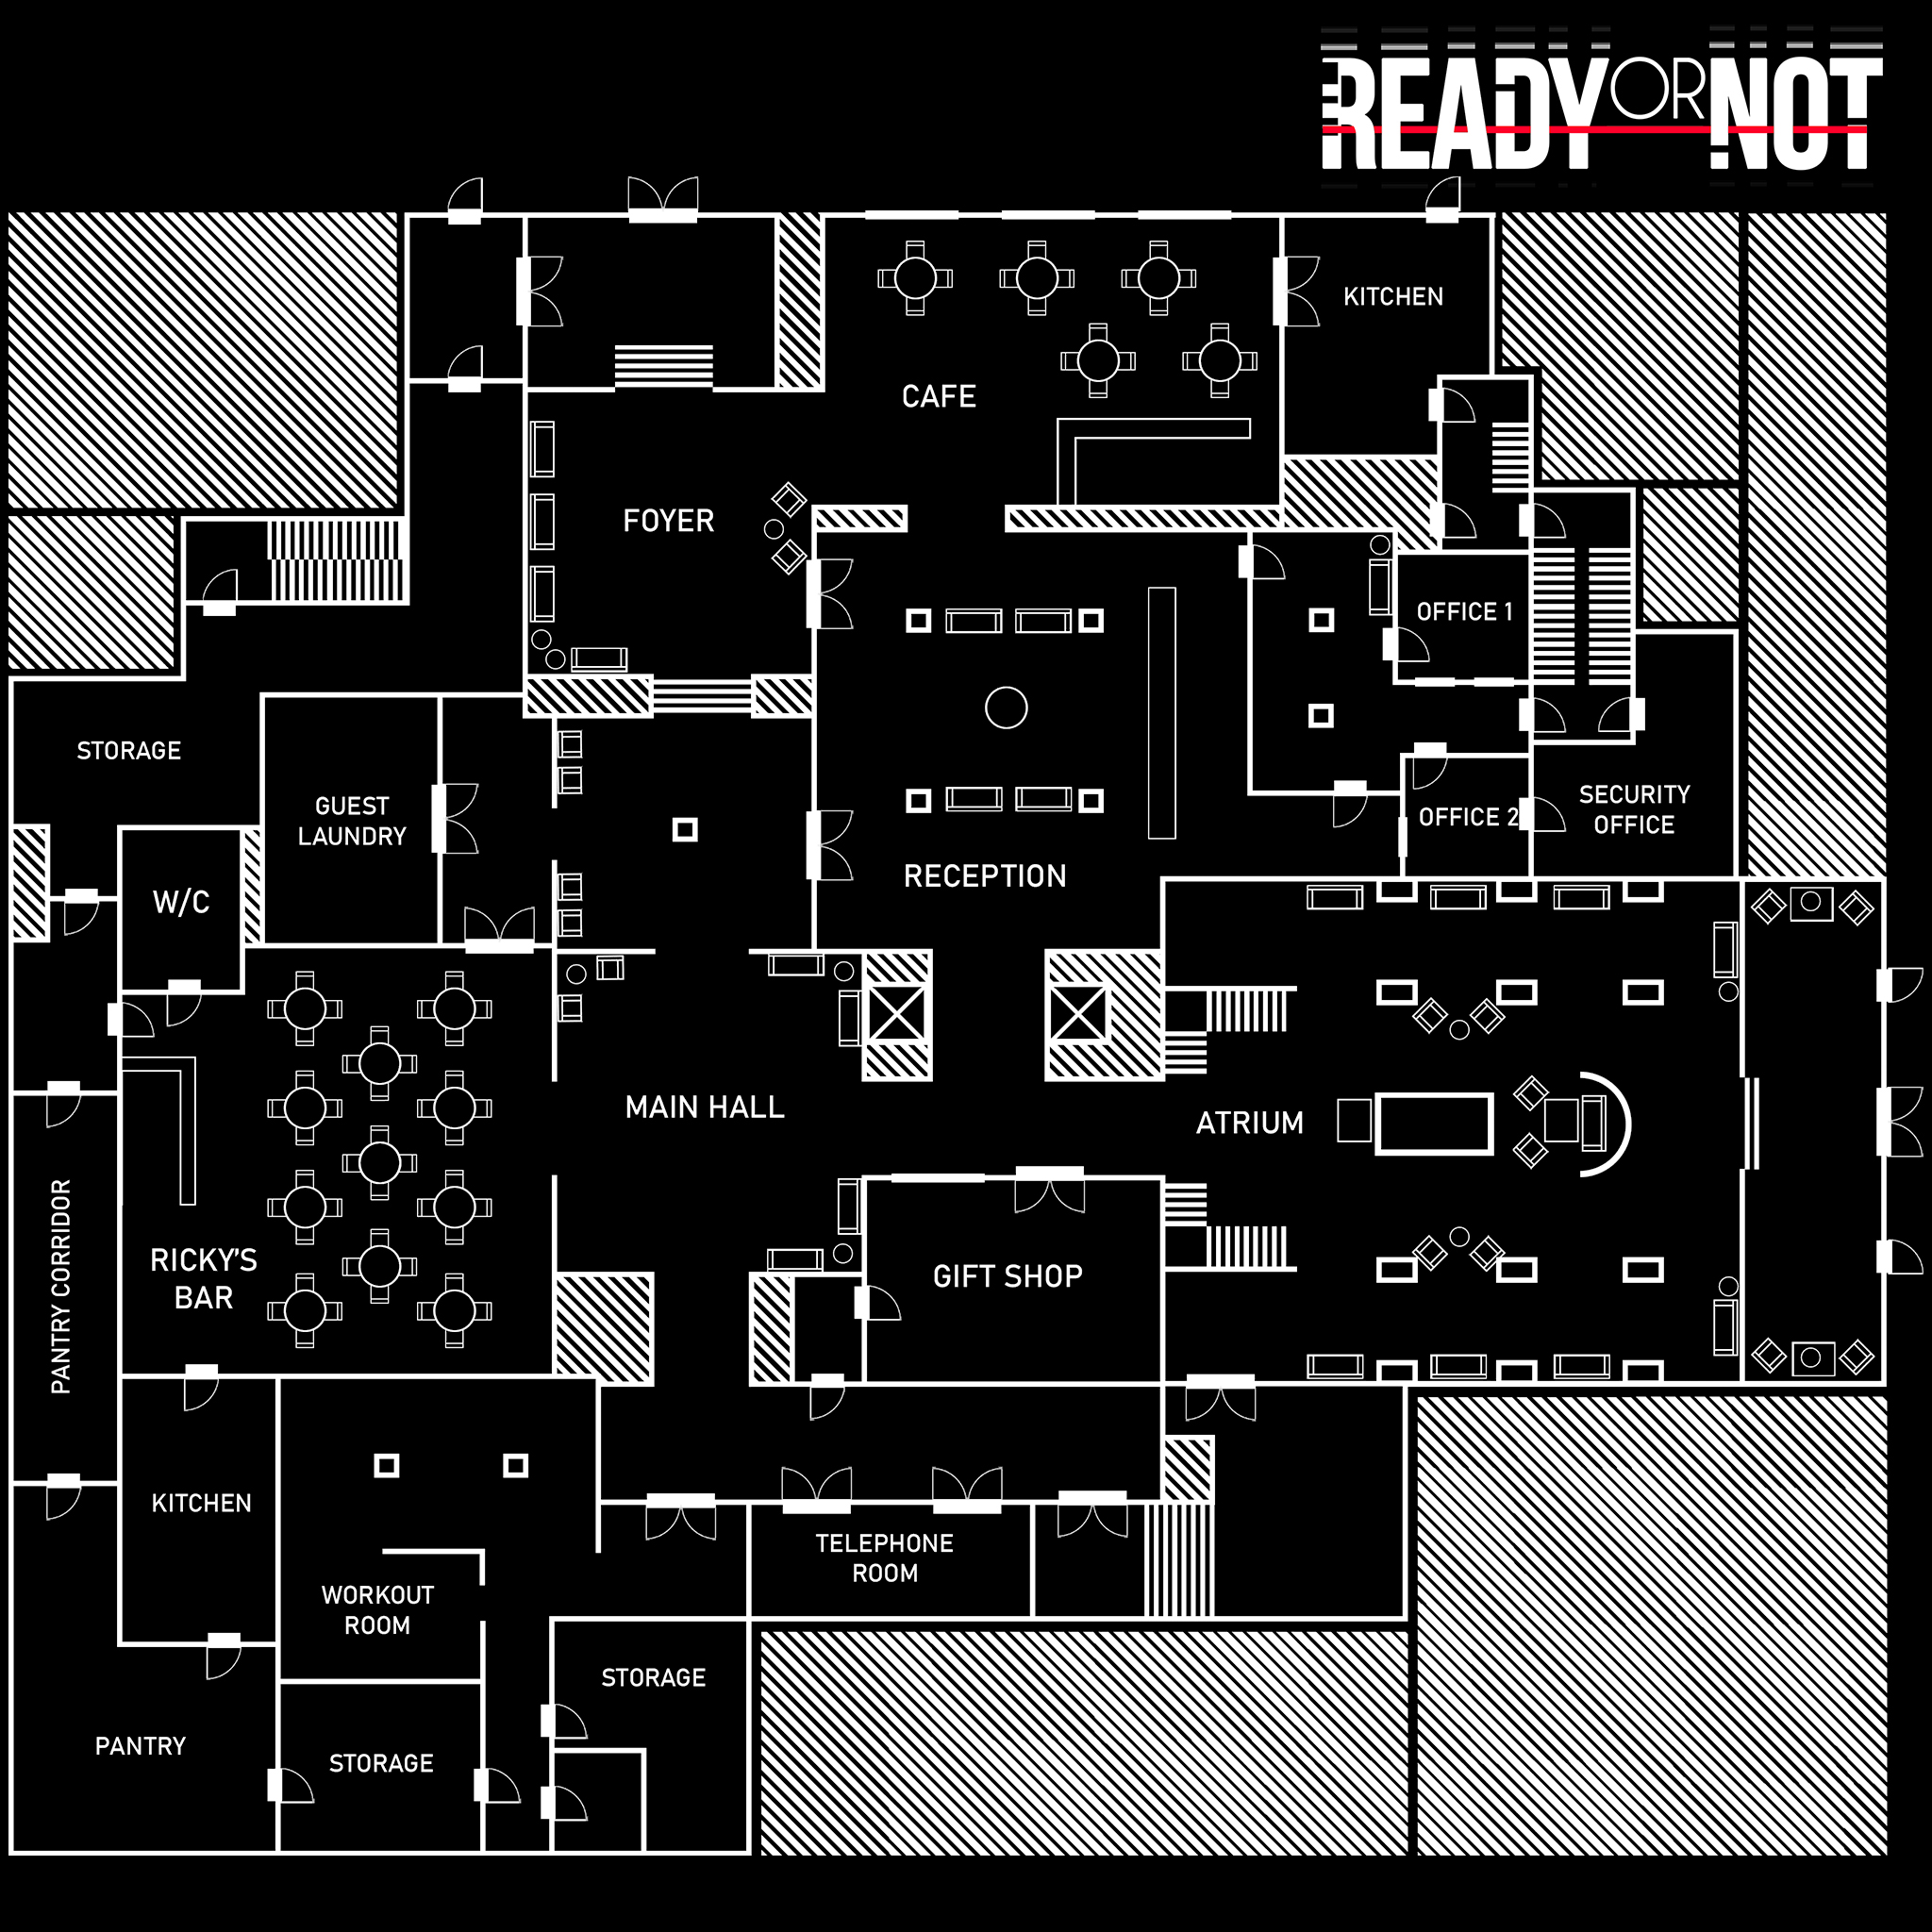 Ready or Not - Map Blueprints - Wenderly Hills Hotel - AA2EF5B